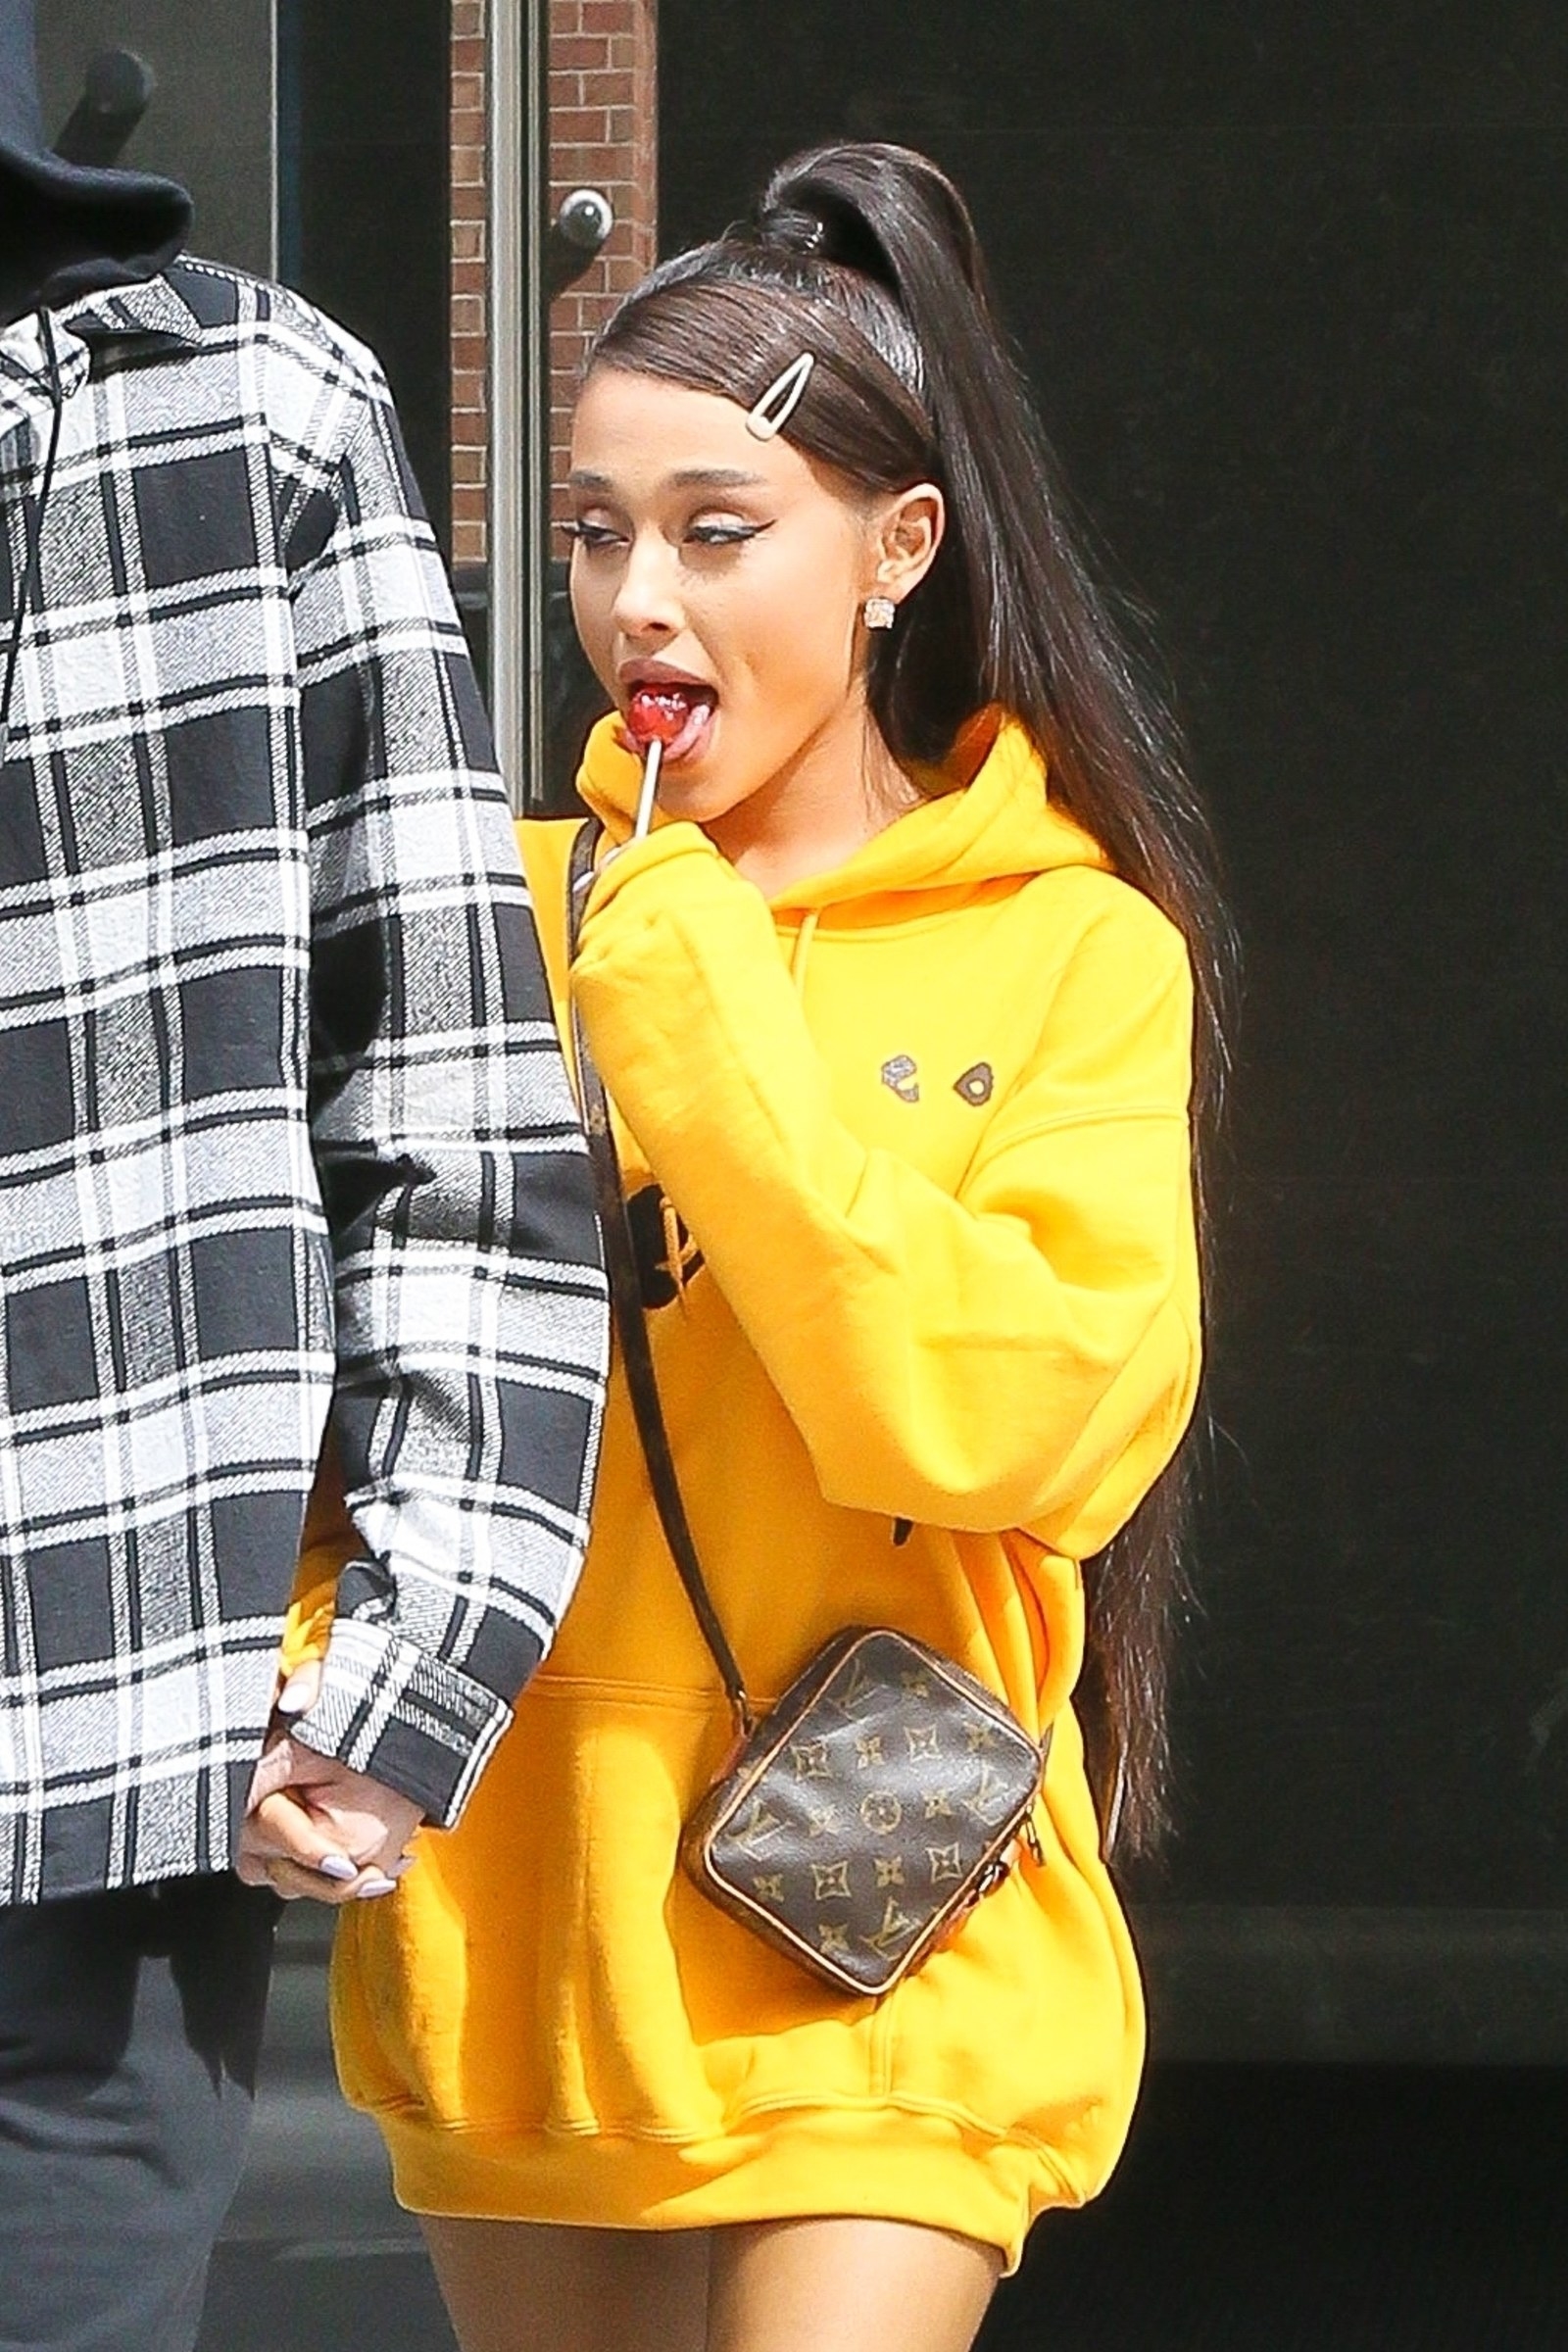 These Pics Of Ariana Grande, A Lollipop, And Pete Davidson Show They're ...